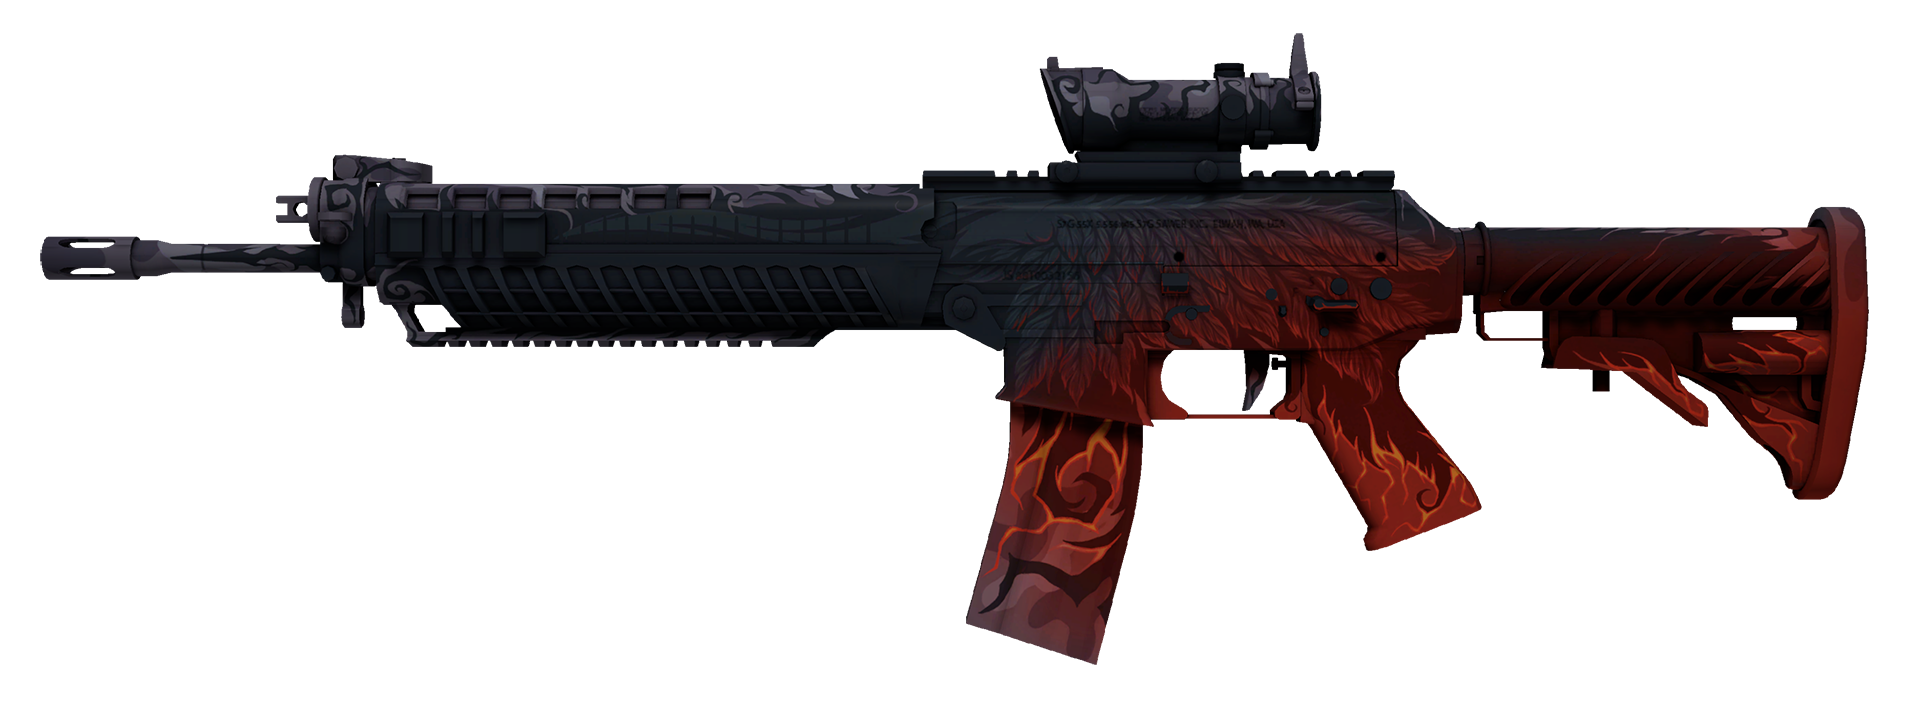 SG 553 Aerial cs go skin download the last version for android